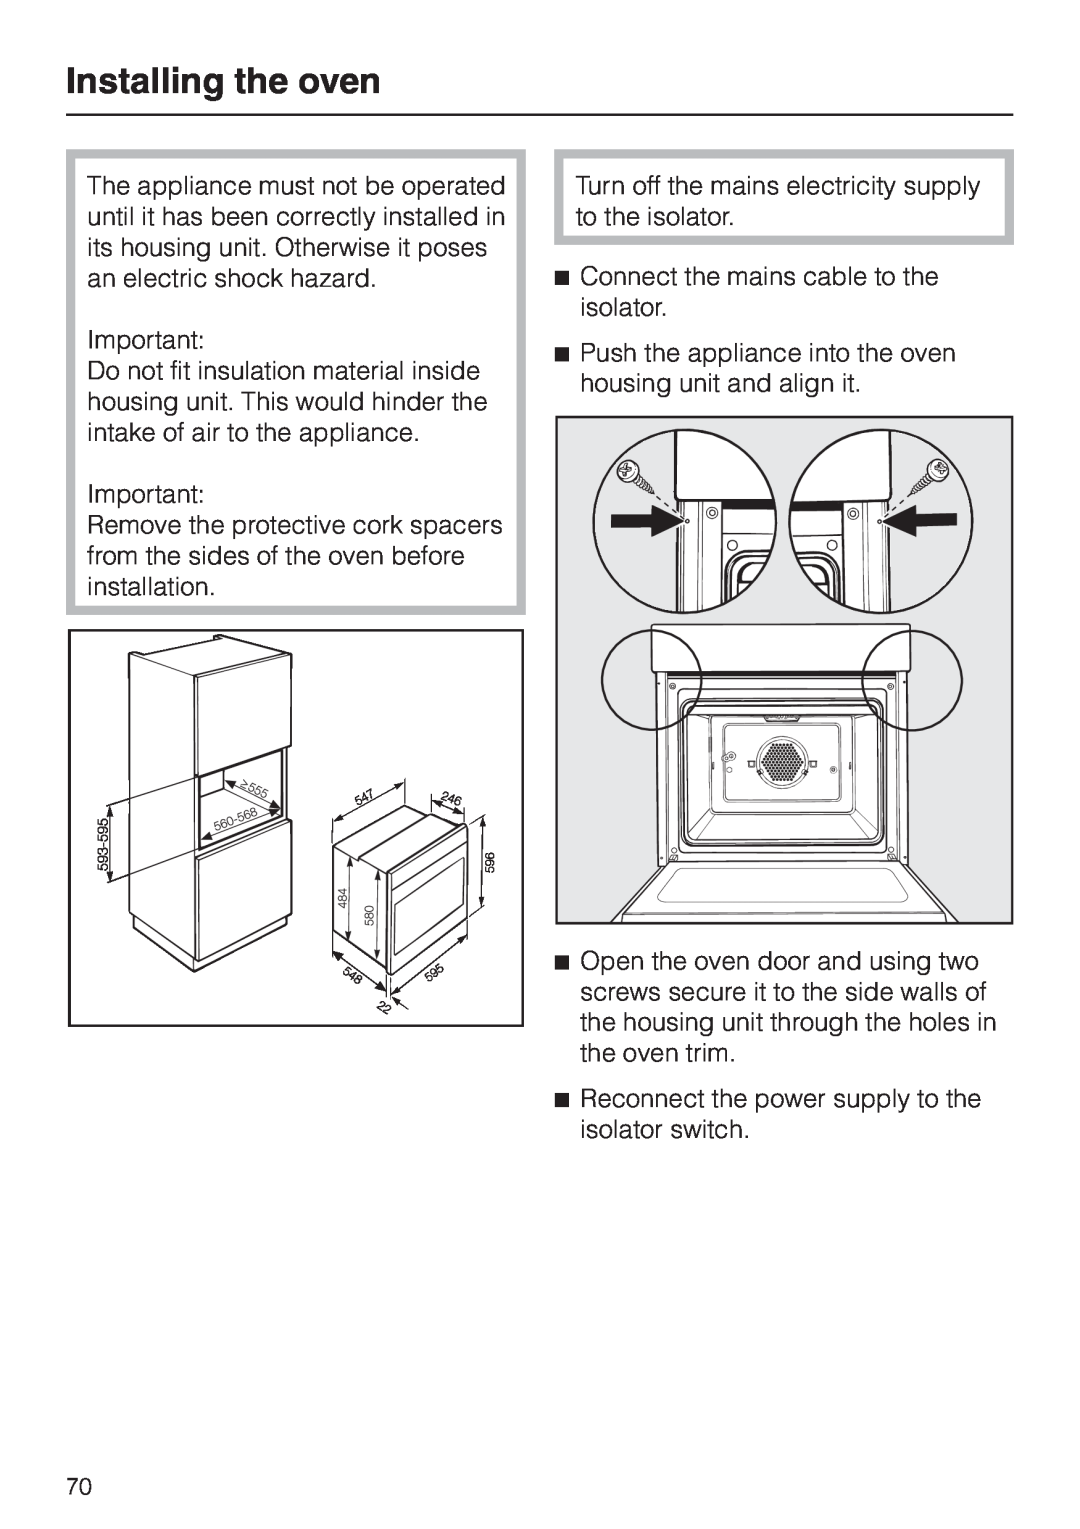 Miele H 4150, H 4220, H 4130, H 4160, H 4120, H 4140, H 4260, H 4230, H 4250, H 4240 installation instructions Installing the oven 